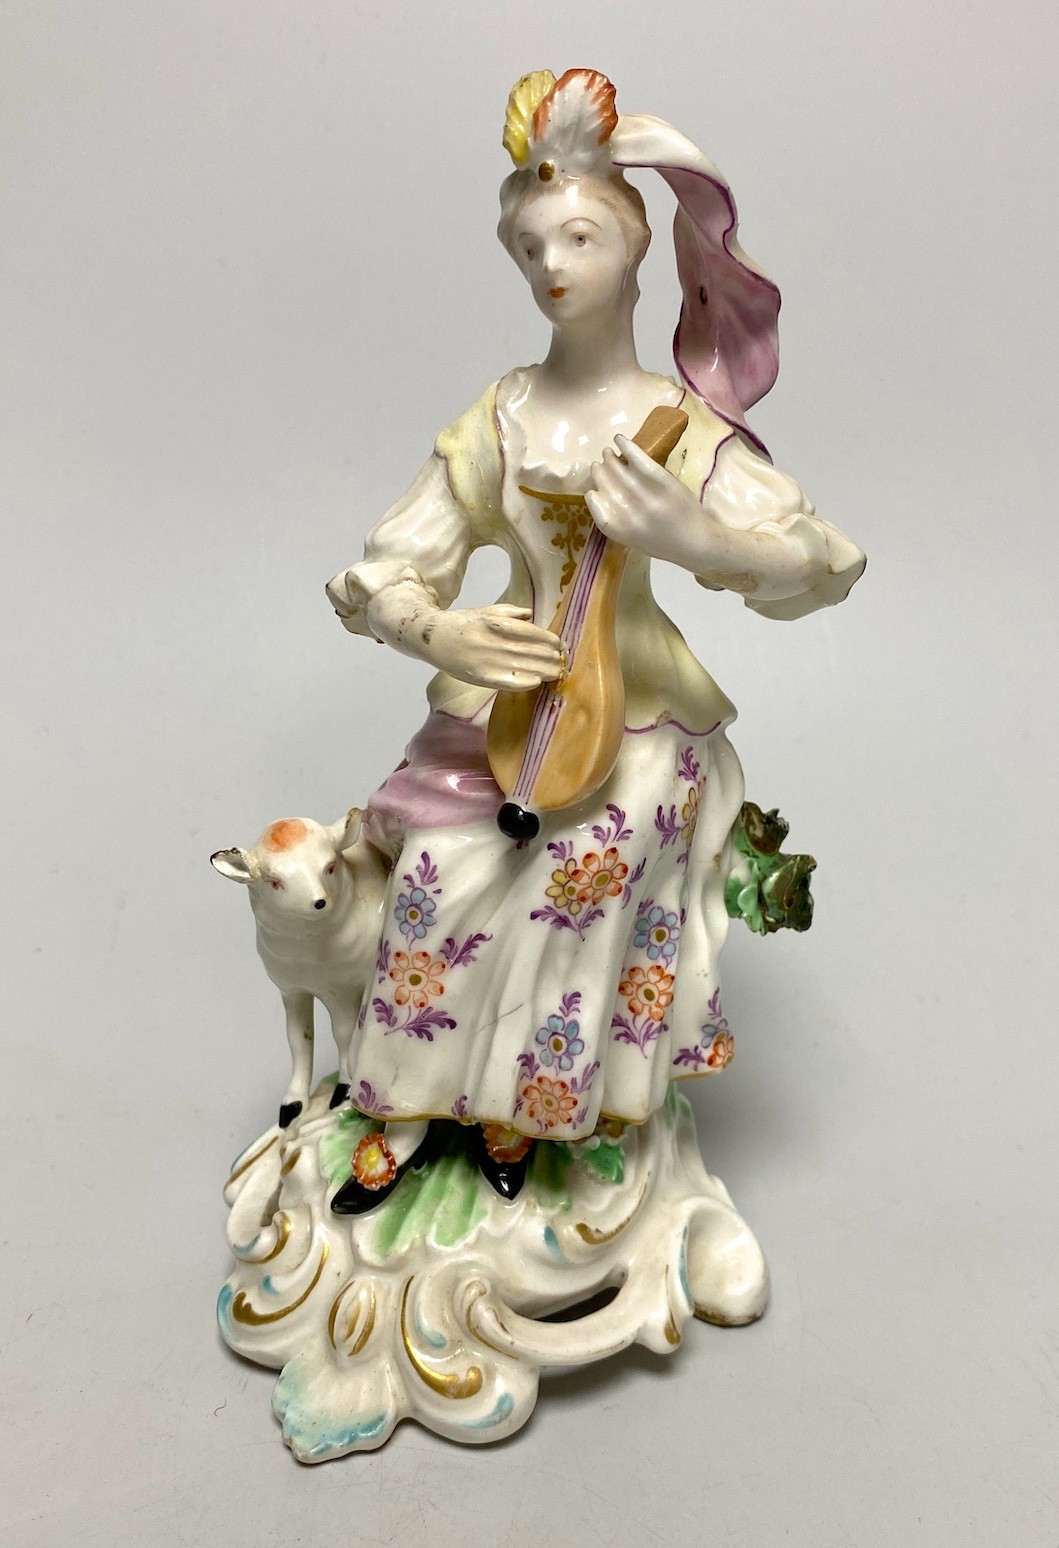 A Derby porcelain figure, modelled as a shepherdess playing a mandolin, seated on a stump, 18th century, 18cm high